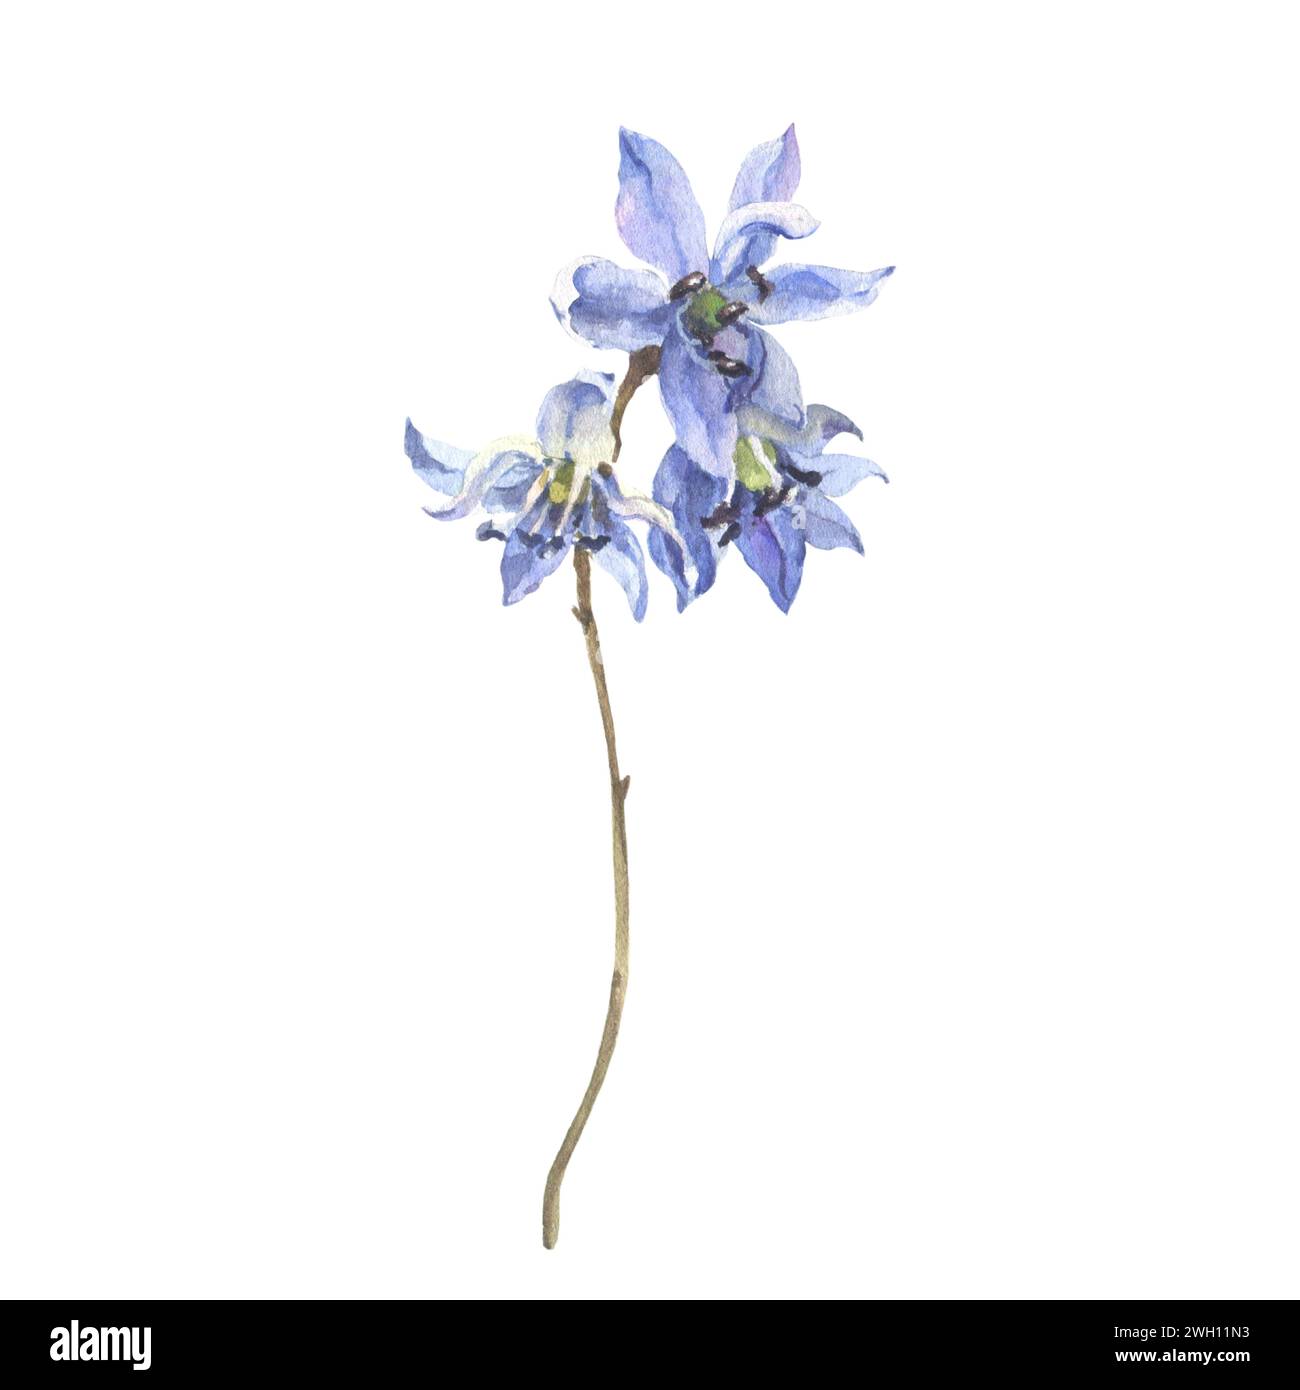 Watercolor first spring flowers isolated on white background. Forest flowers liverwort, scilla, coppice. Illustration of delicate lilac flowers Stock Photo